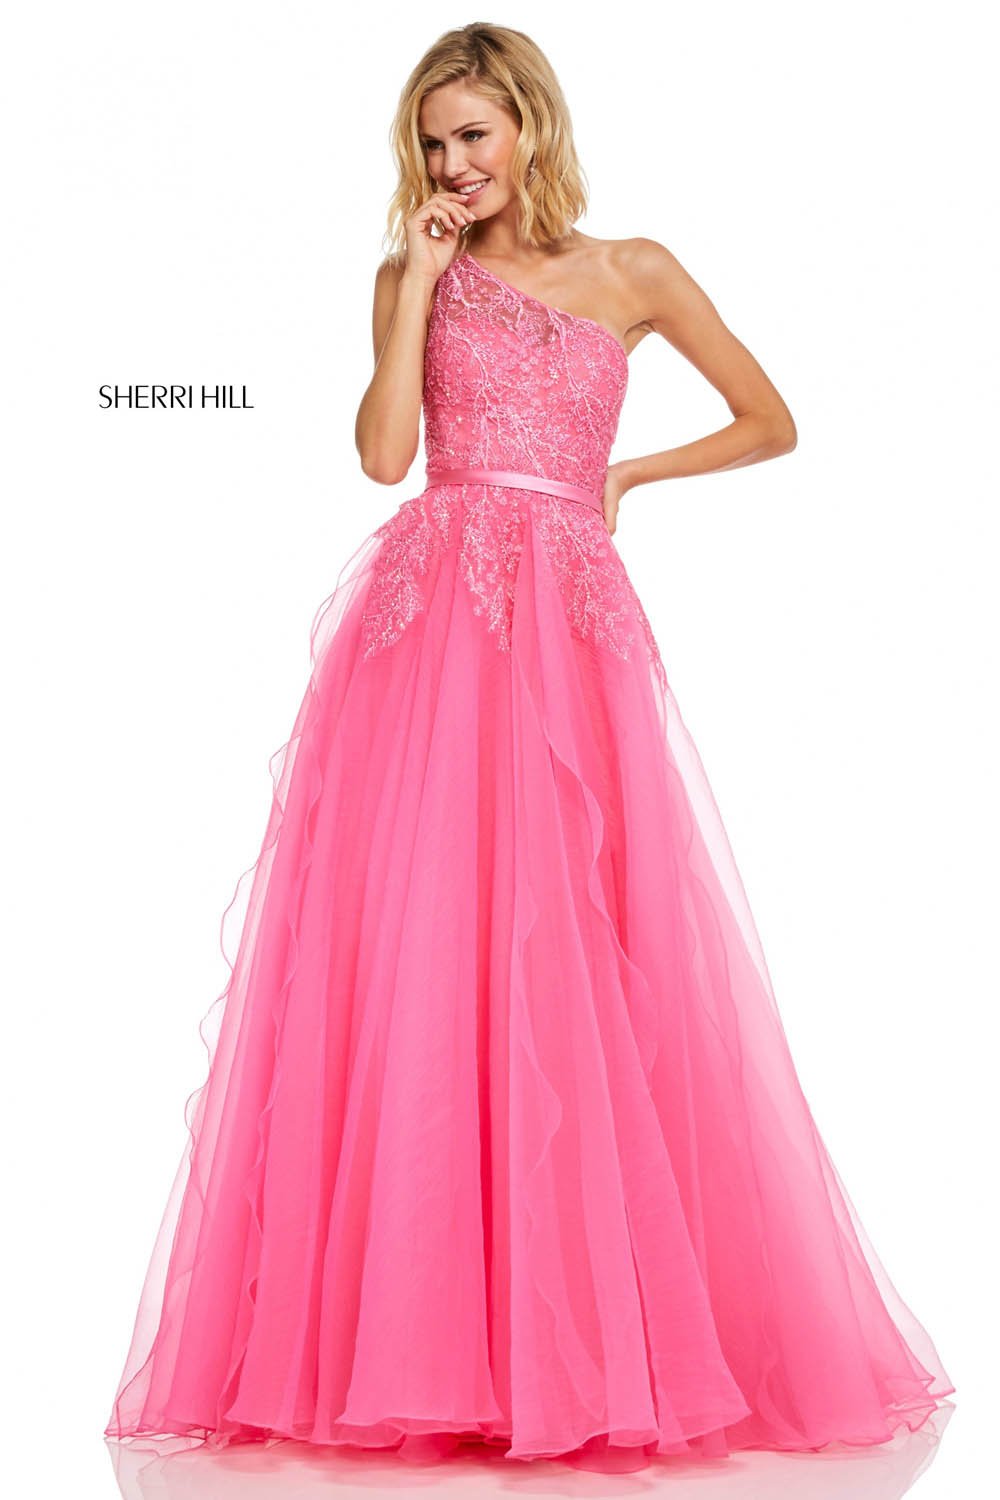 Sherri Hill 52736 dress images in these colors: Ivory, Hot Pink, Yellow, Orange.